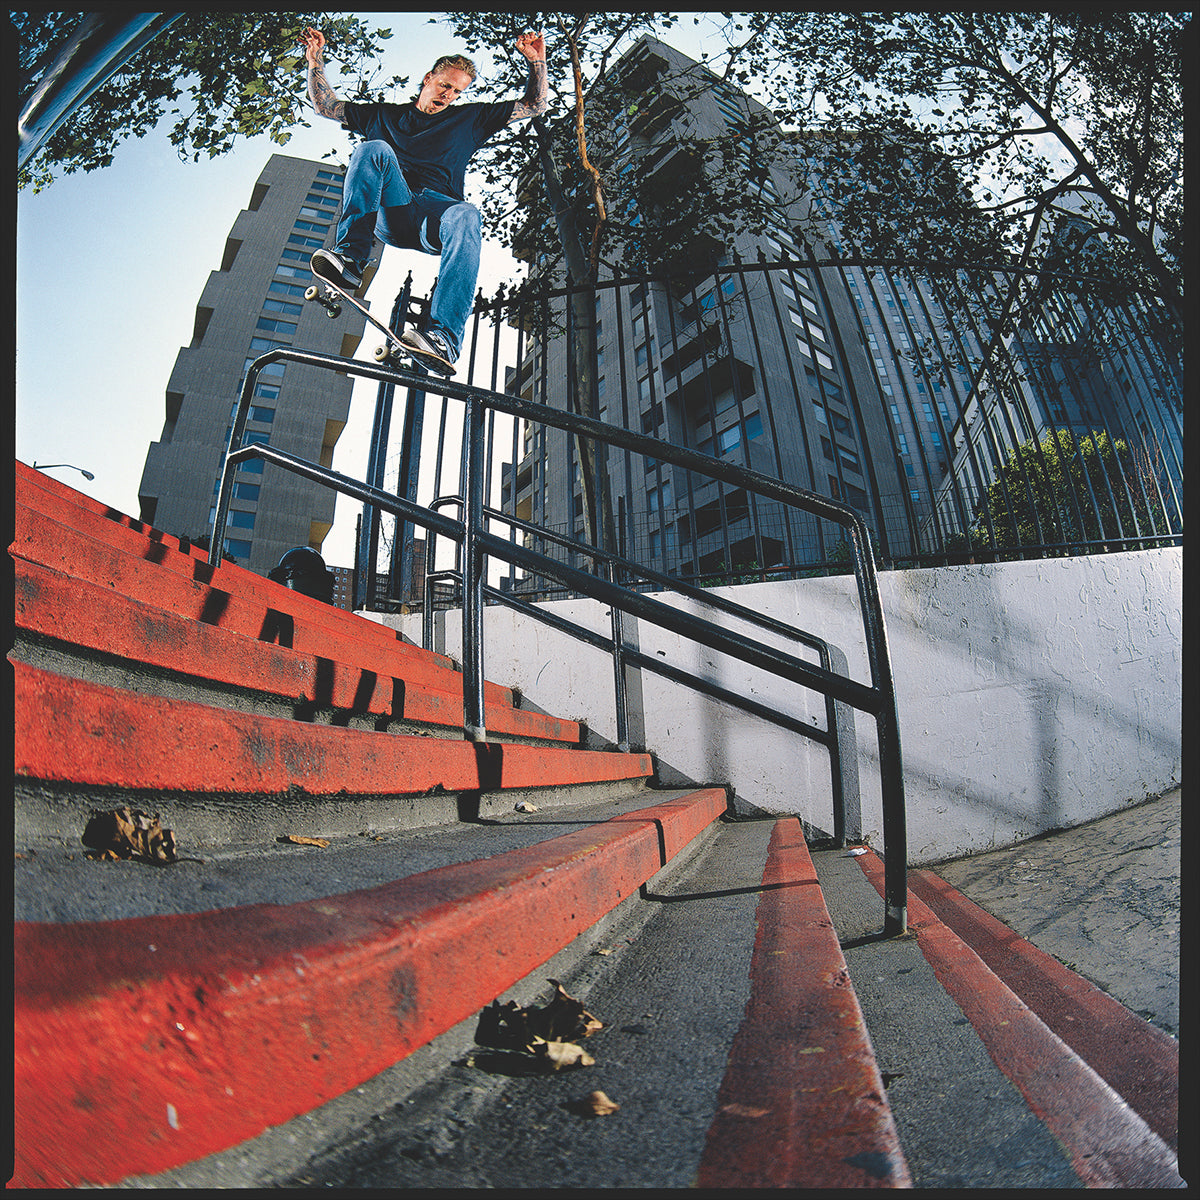 Anthony Van Engelen, over-the-back nosegrind, New York, 2007. photo: Mike O'Meally